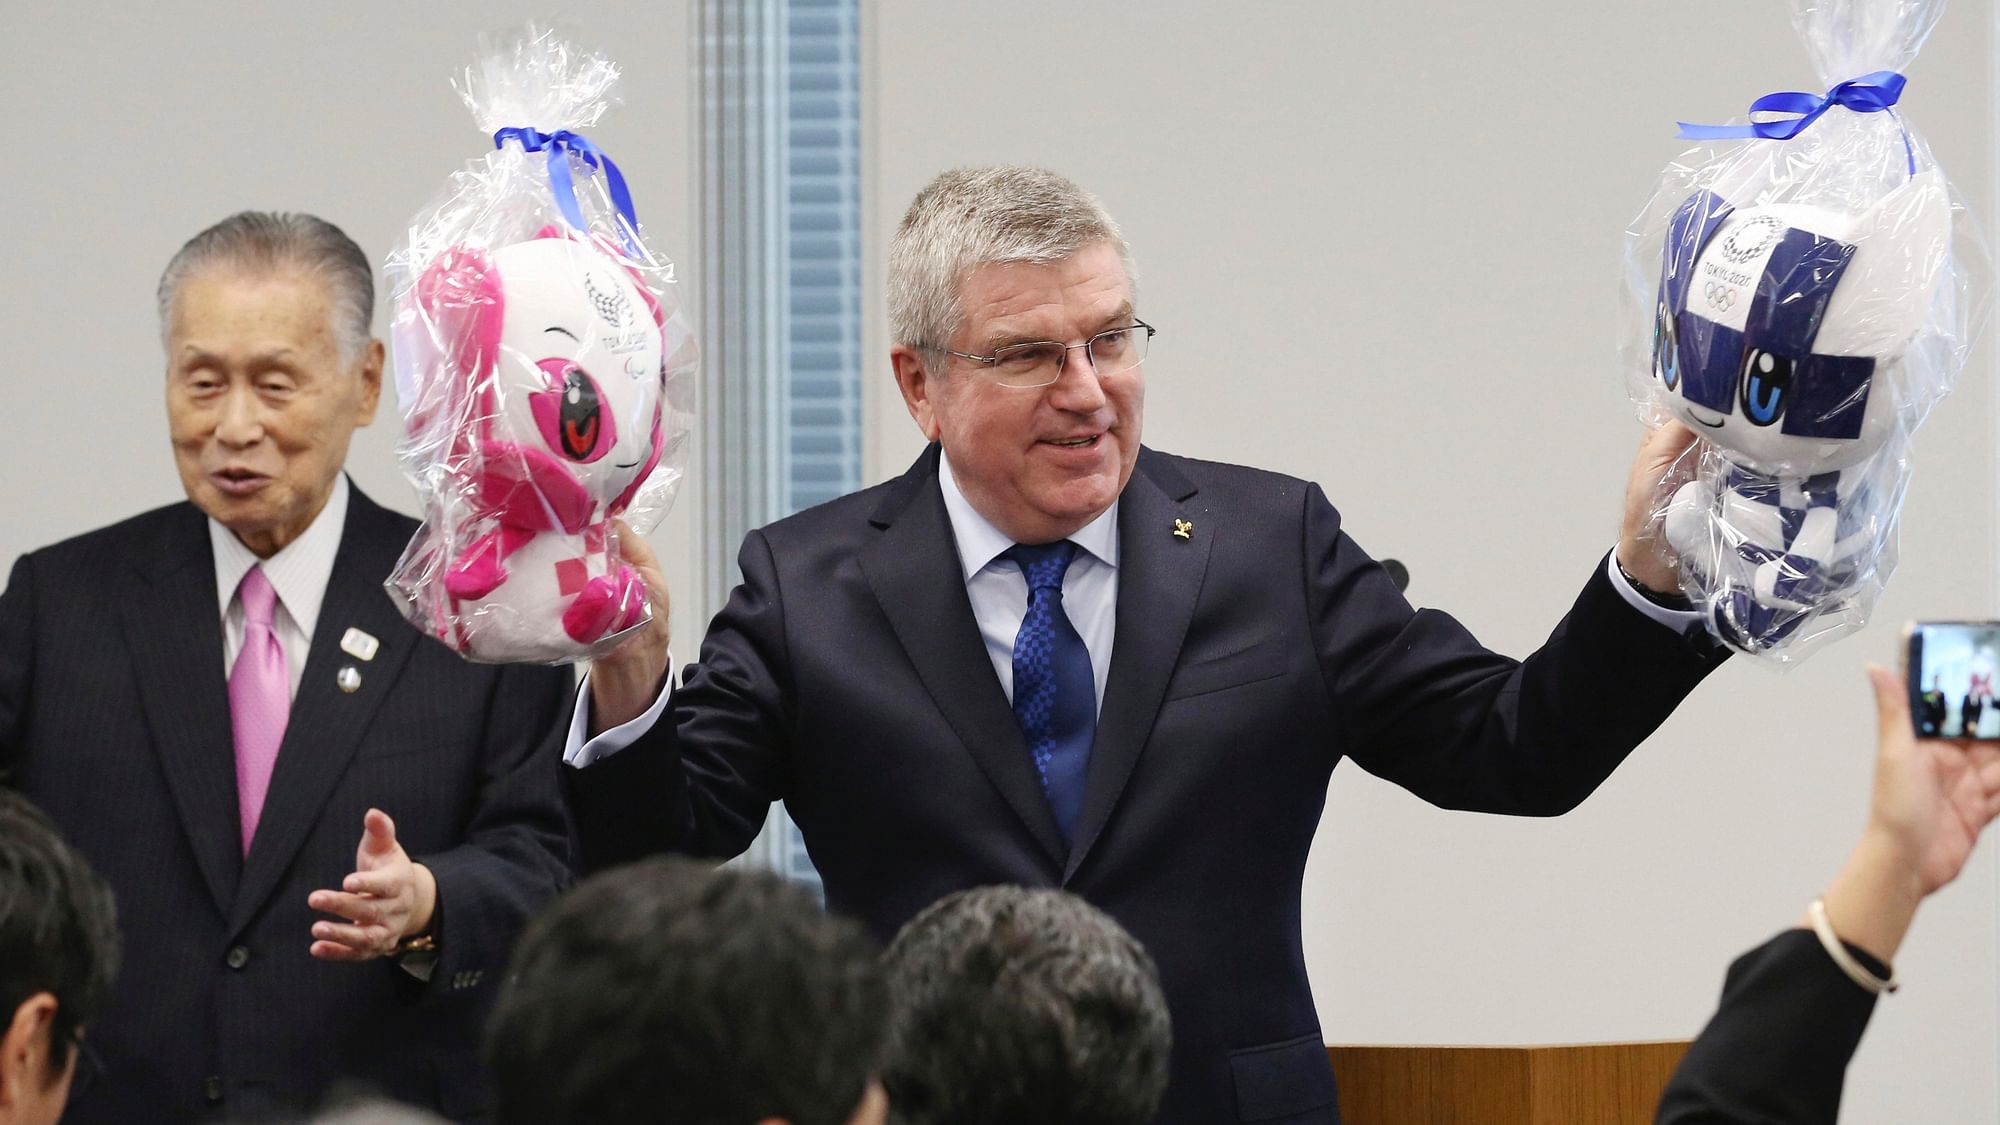 International Olympic Committee (IOC) President Thomas Bach said on Wednesday, 1 January that the upcoming 2020 Tokyo Olympics aims to be a “carbon-neutral” Games.